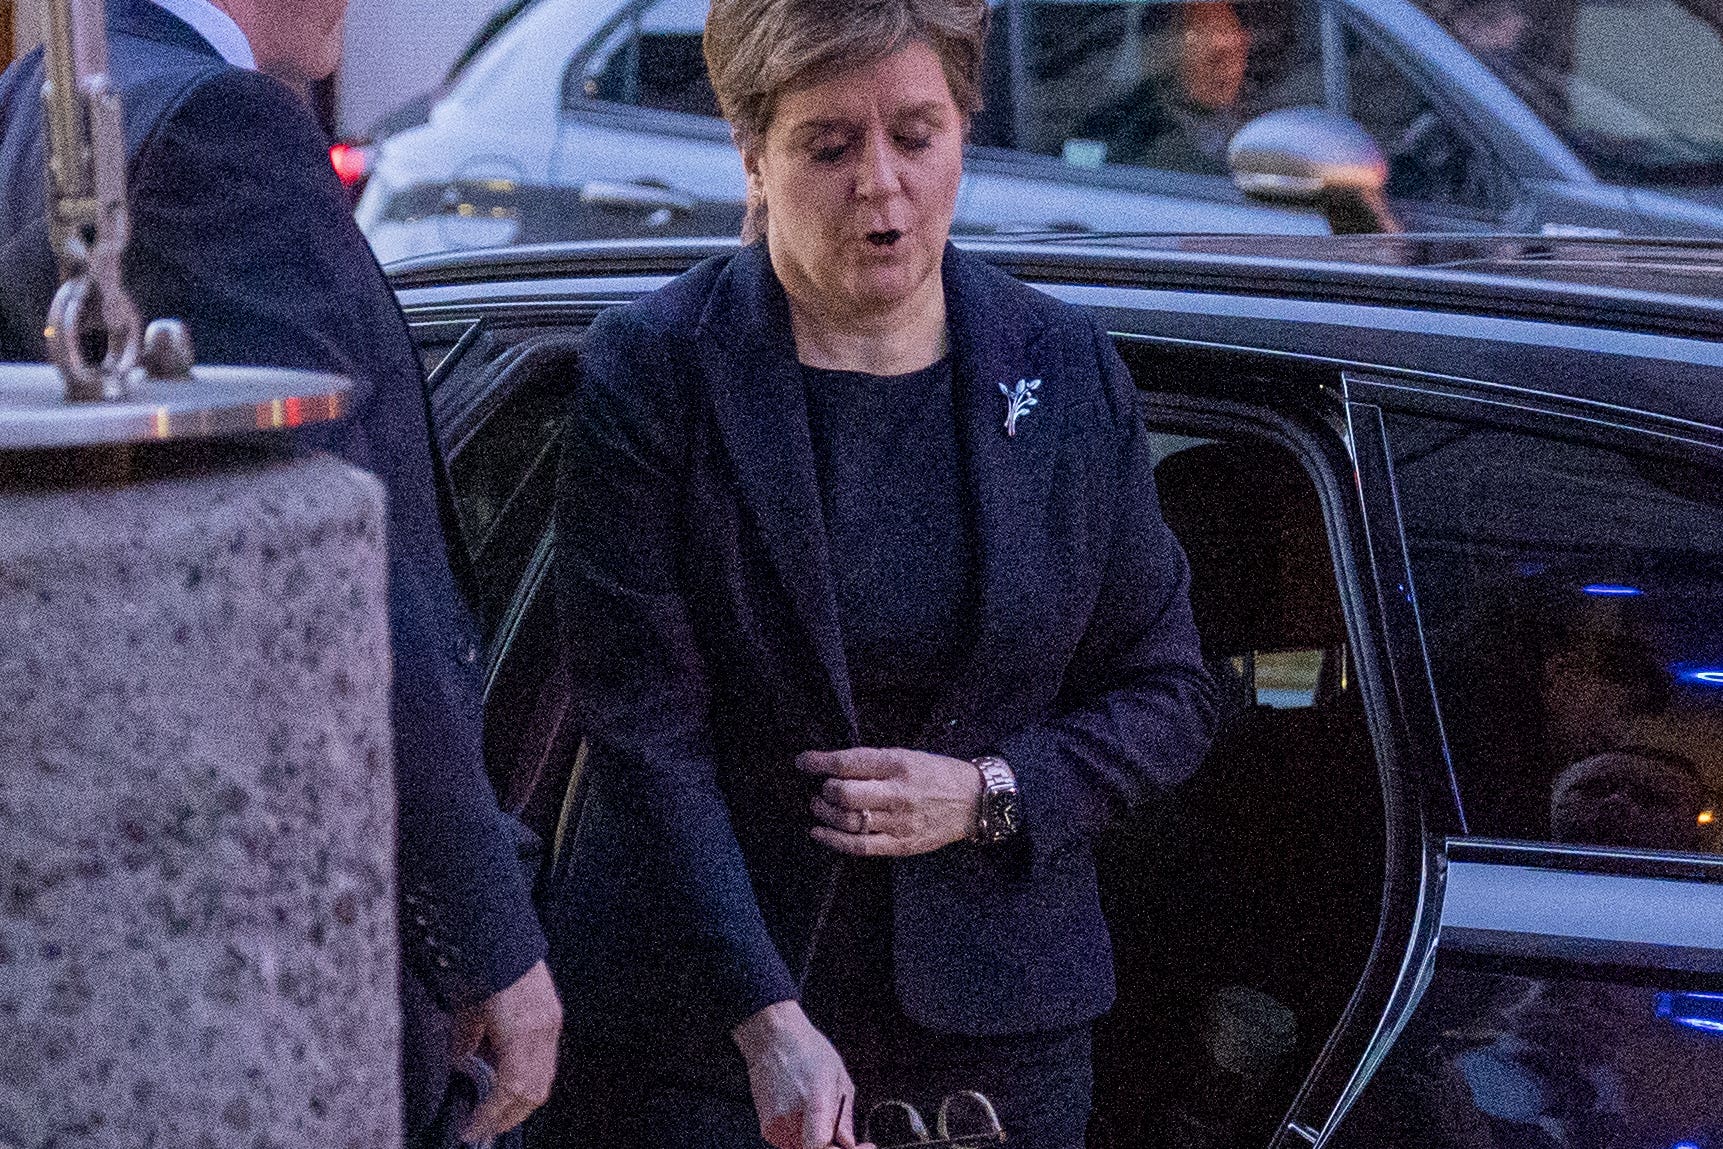 Former first minister Nicola Sturgeon arrives at the Covid inquiry